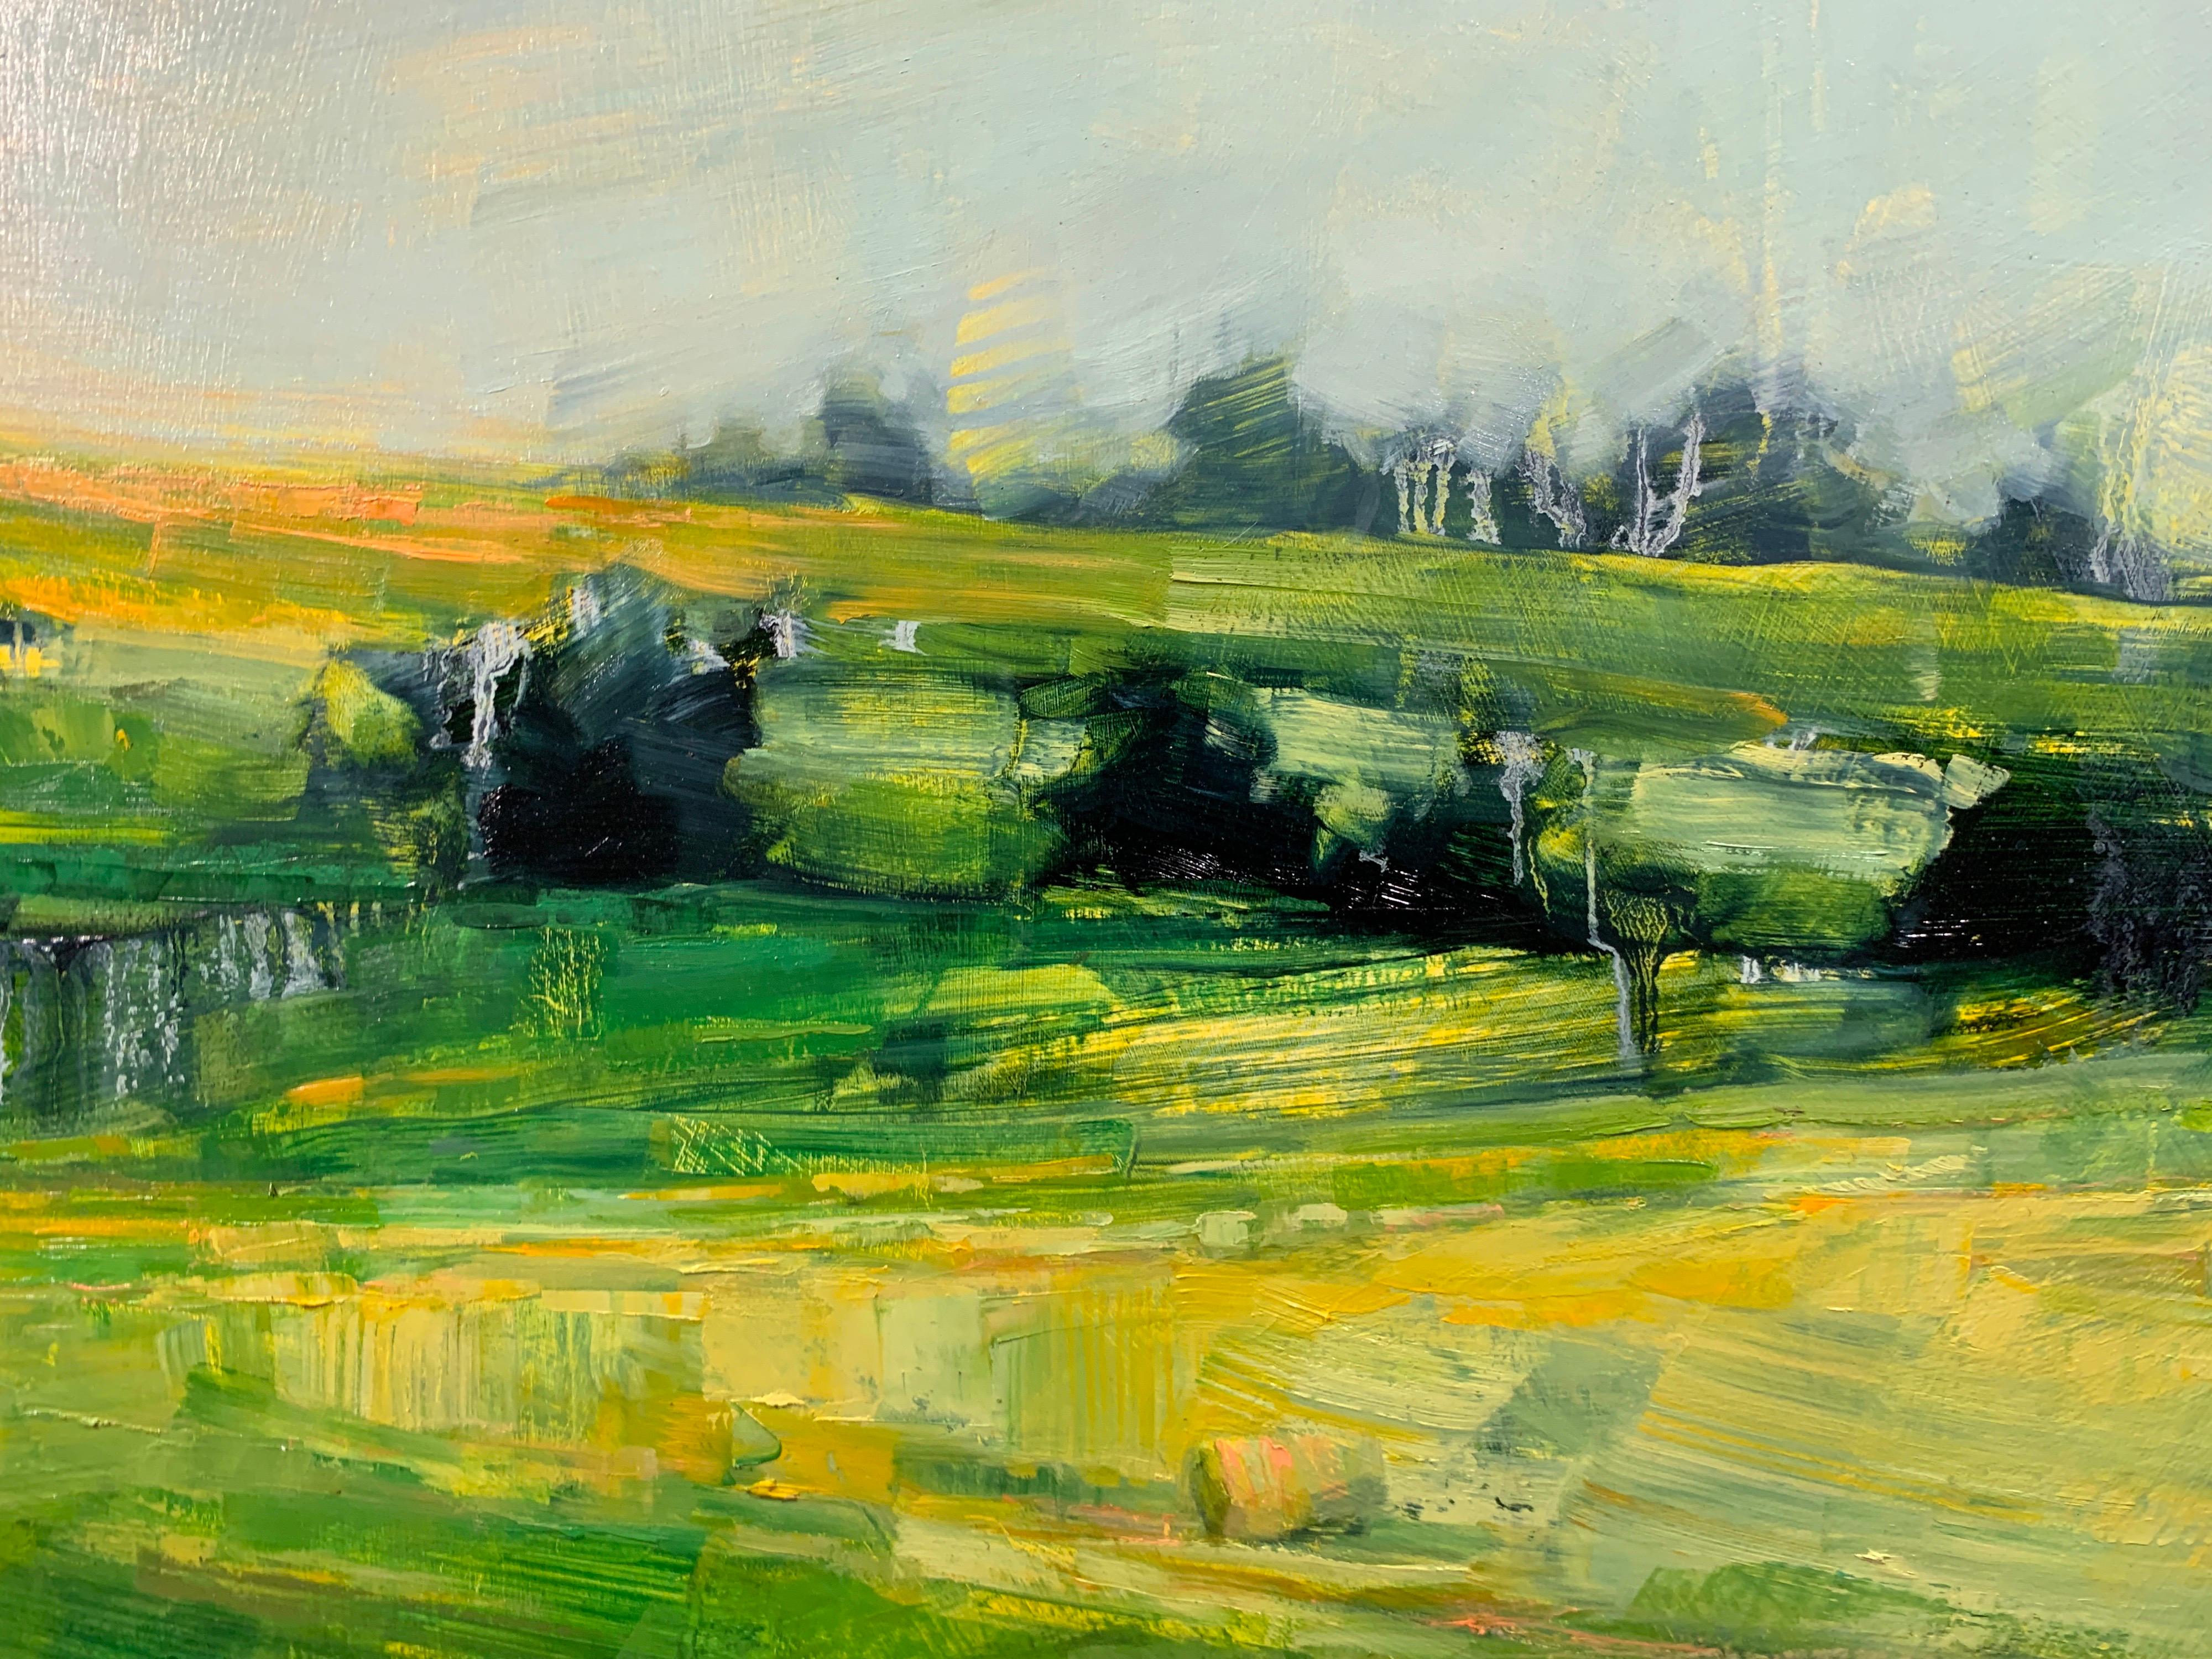 As It So Happens by Angie Renfro, Horizontal Oil on Board Landscape Painting 6